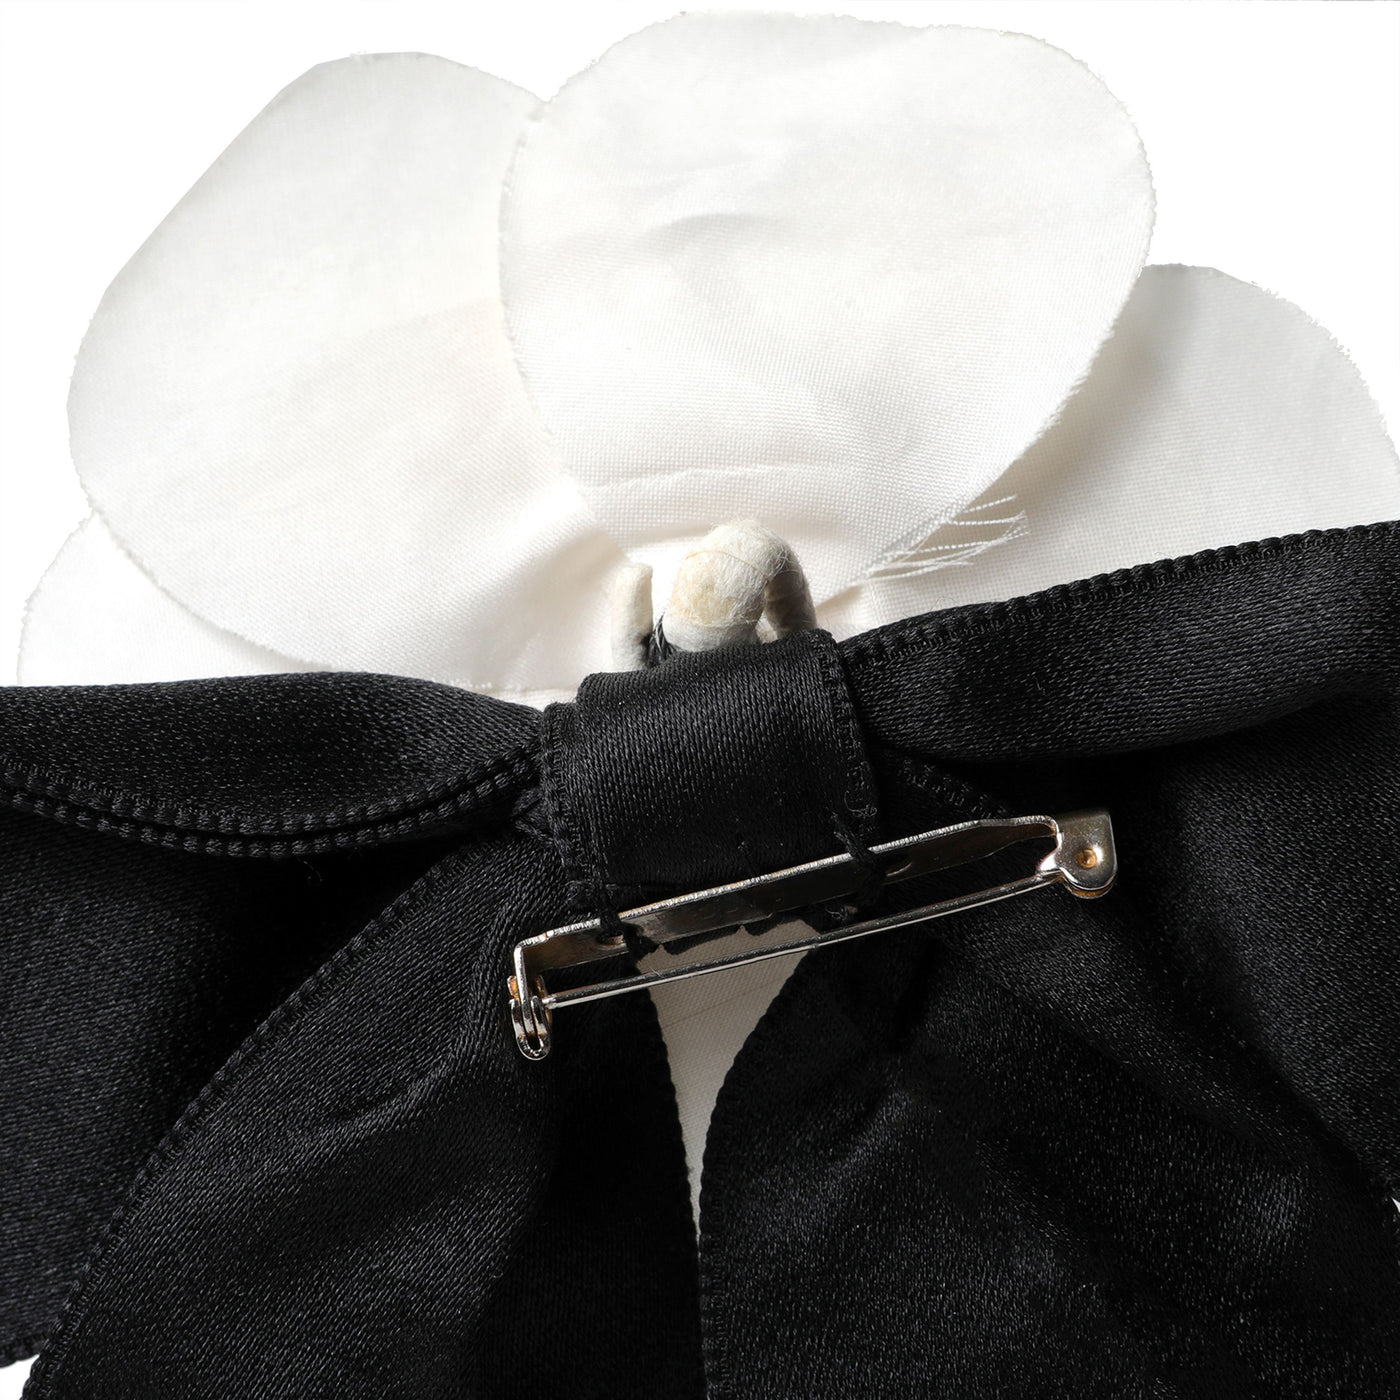 Chanel Bow & Flower Camelia Pin